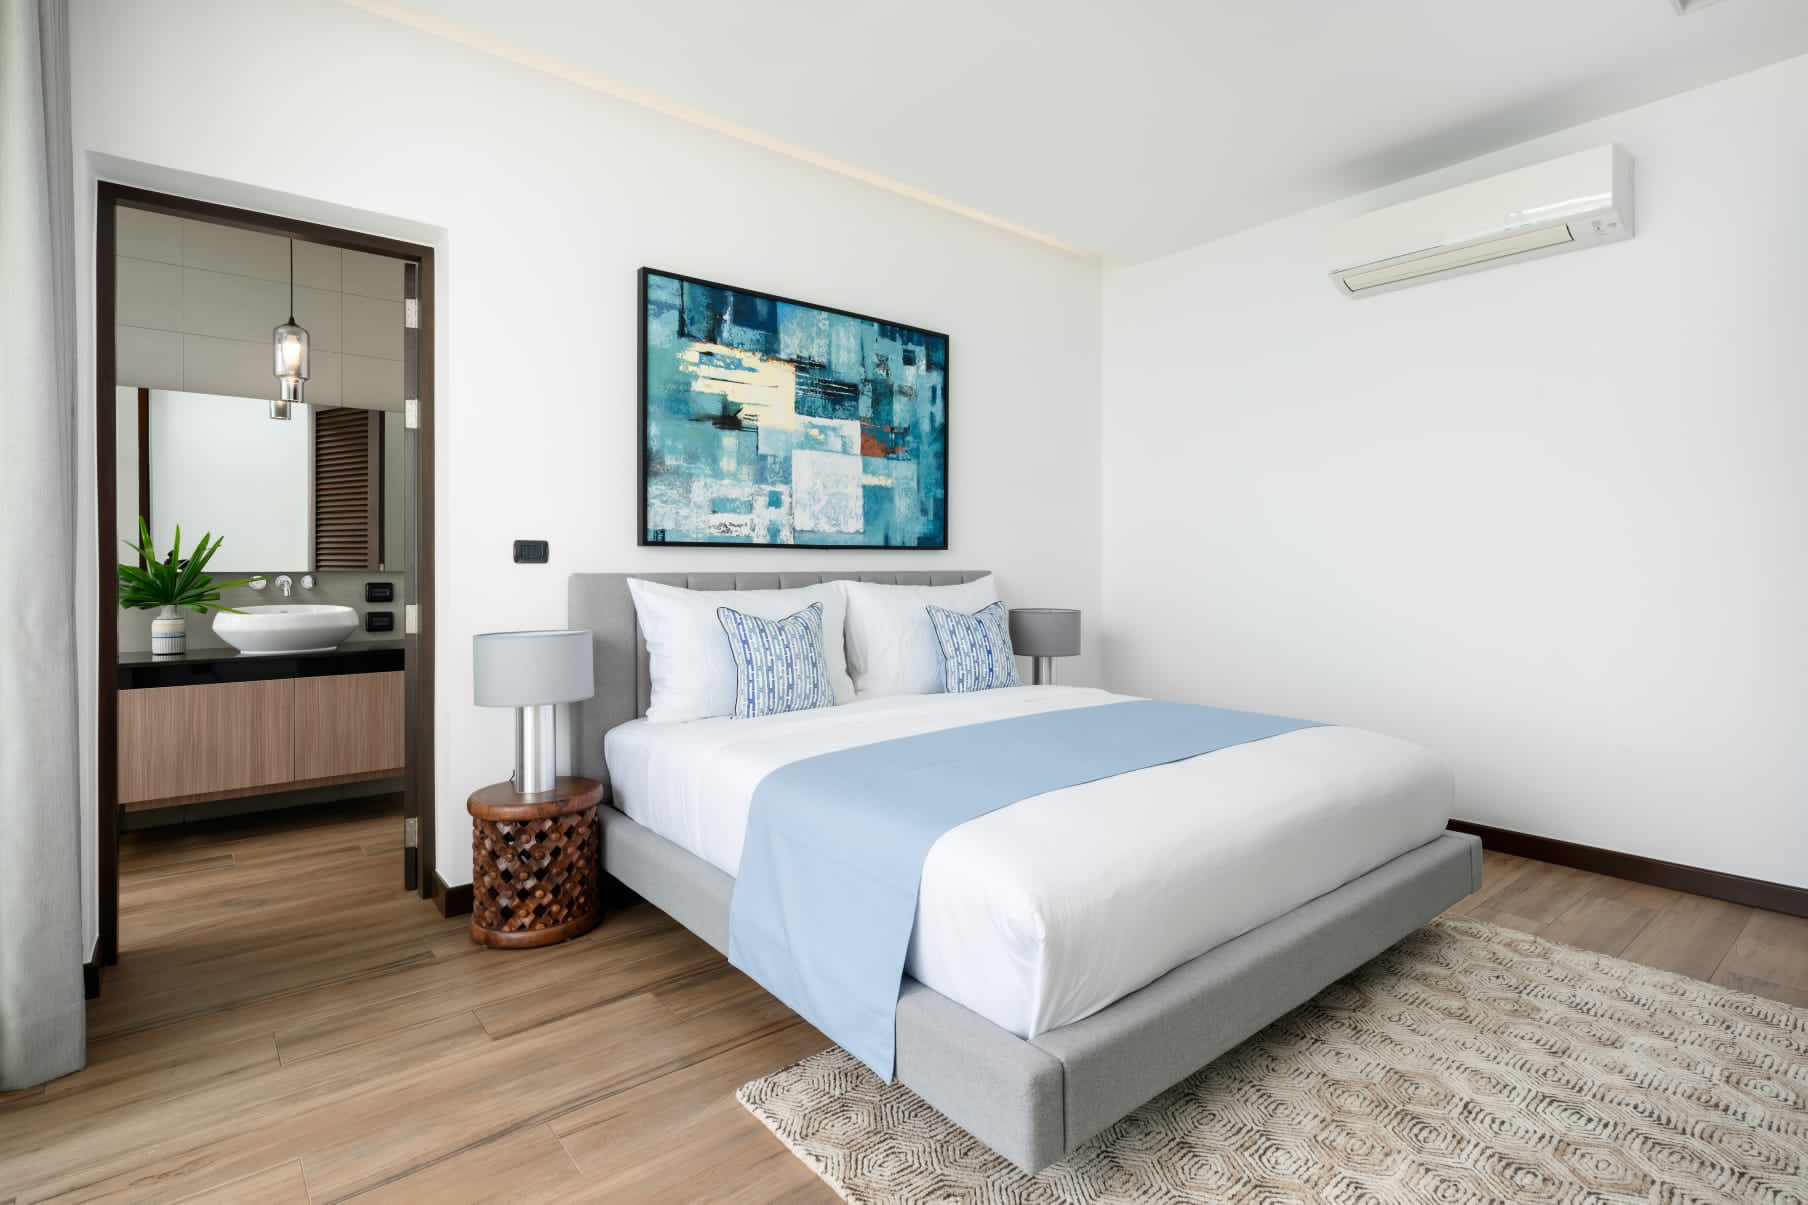 Verano Residence - Quality 3 Bedroom Seaview Pool Villa in Chaweng Noi for Sale: Verano Residence - Quality 3 Bedroom Seaview Pool Villa in Chaweng Noi for Sale